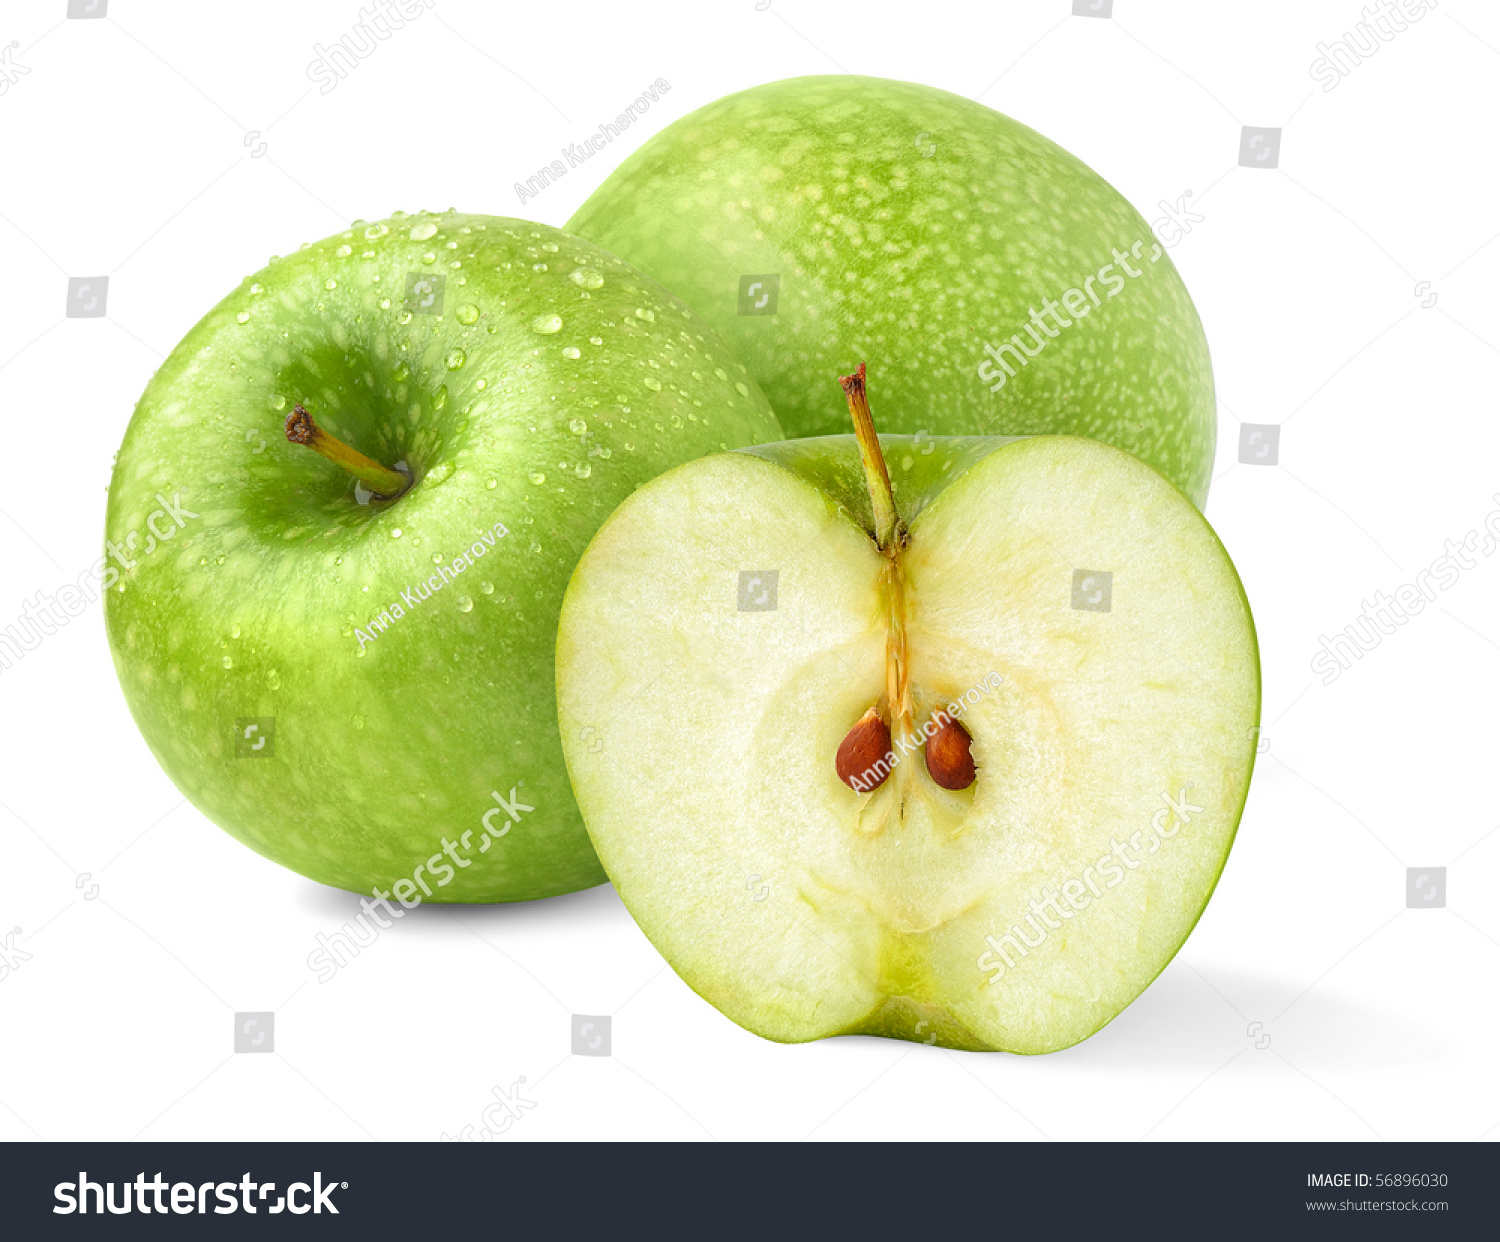 Isolated apples. Three green 'Granny Smith' fruits, one cut in half on white background #56896030